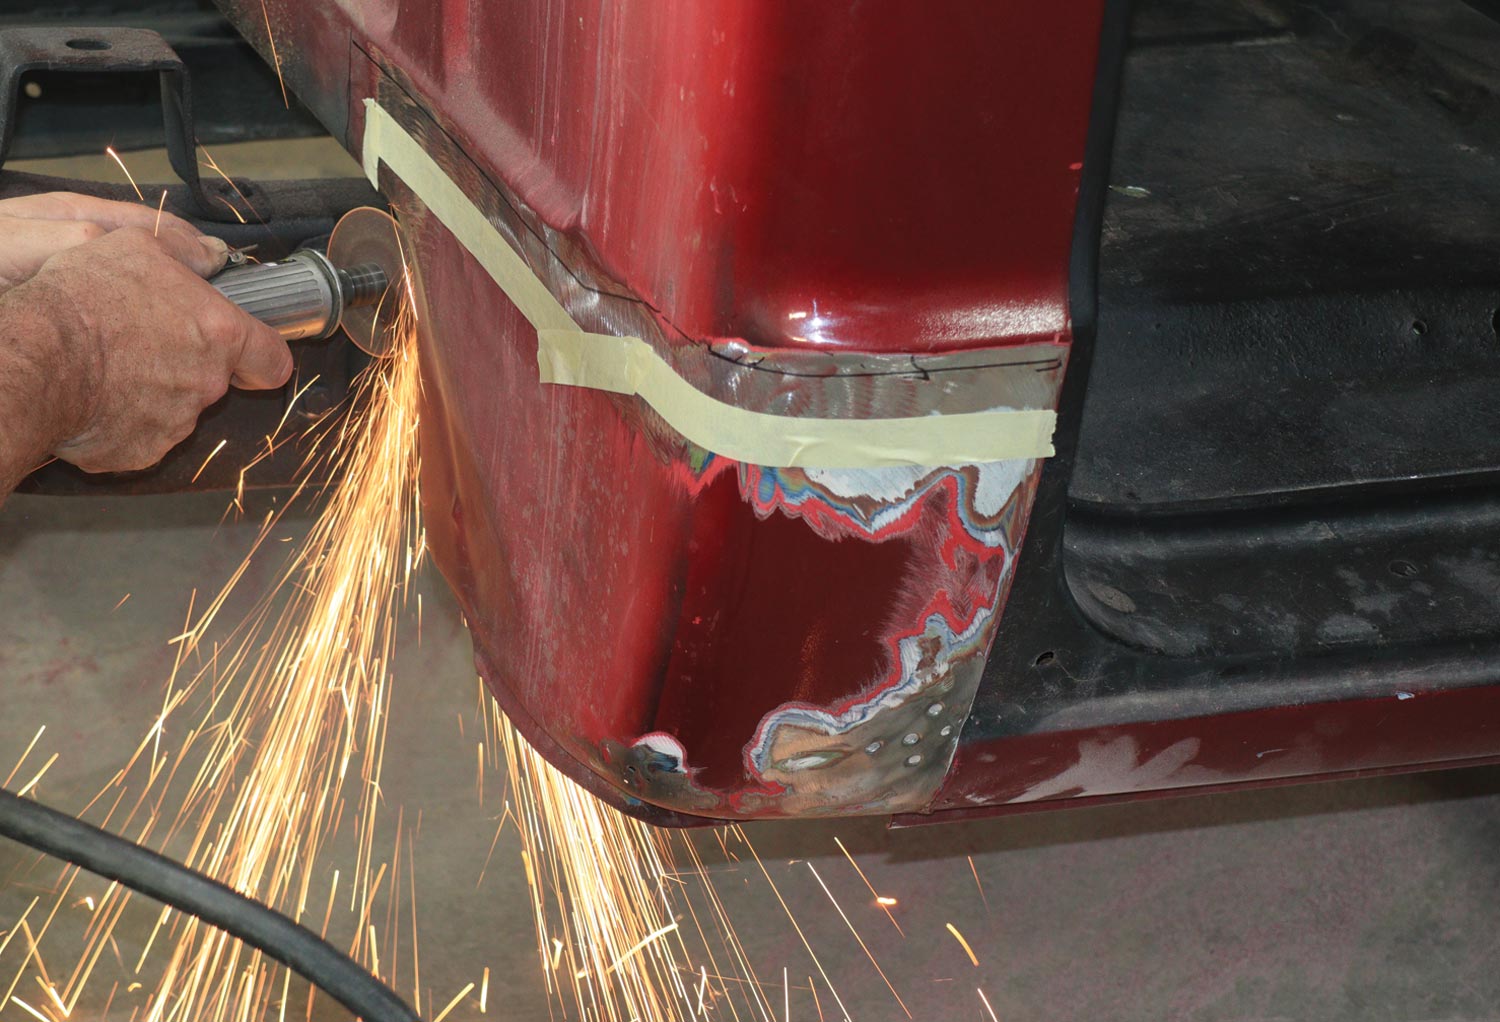 using a die-grinder with a 3-inch cutoff disc, mechanic cut open the end seams